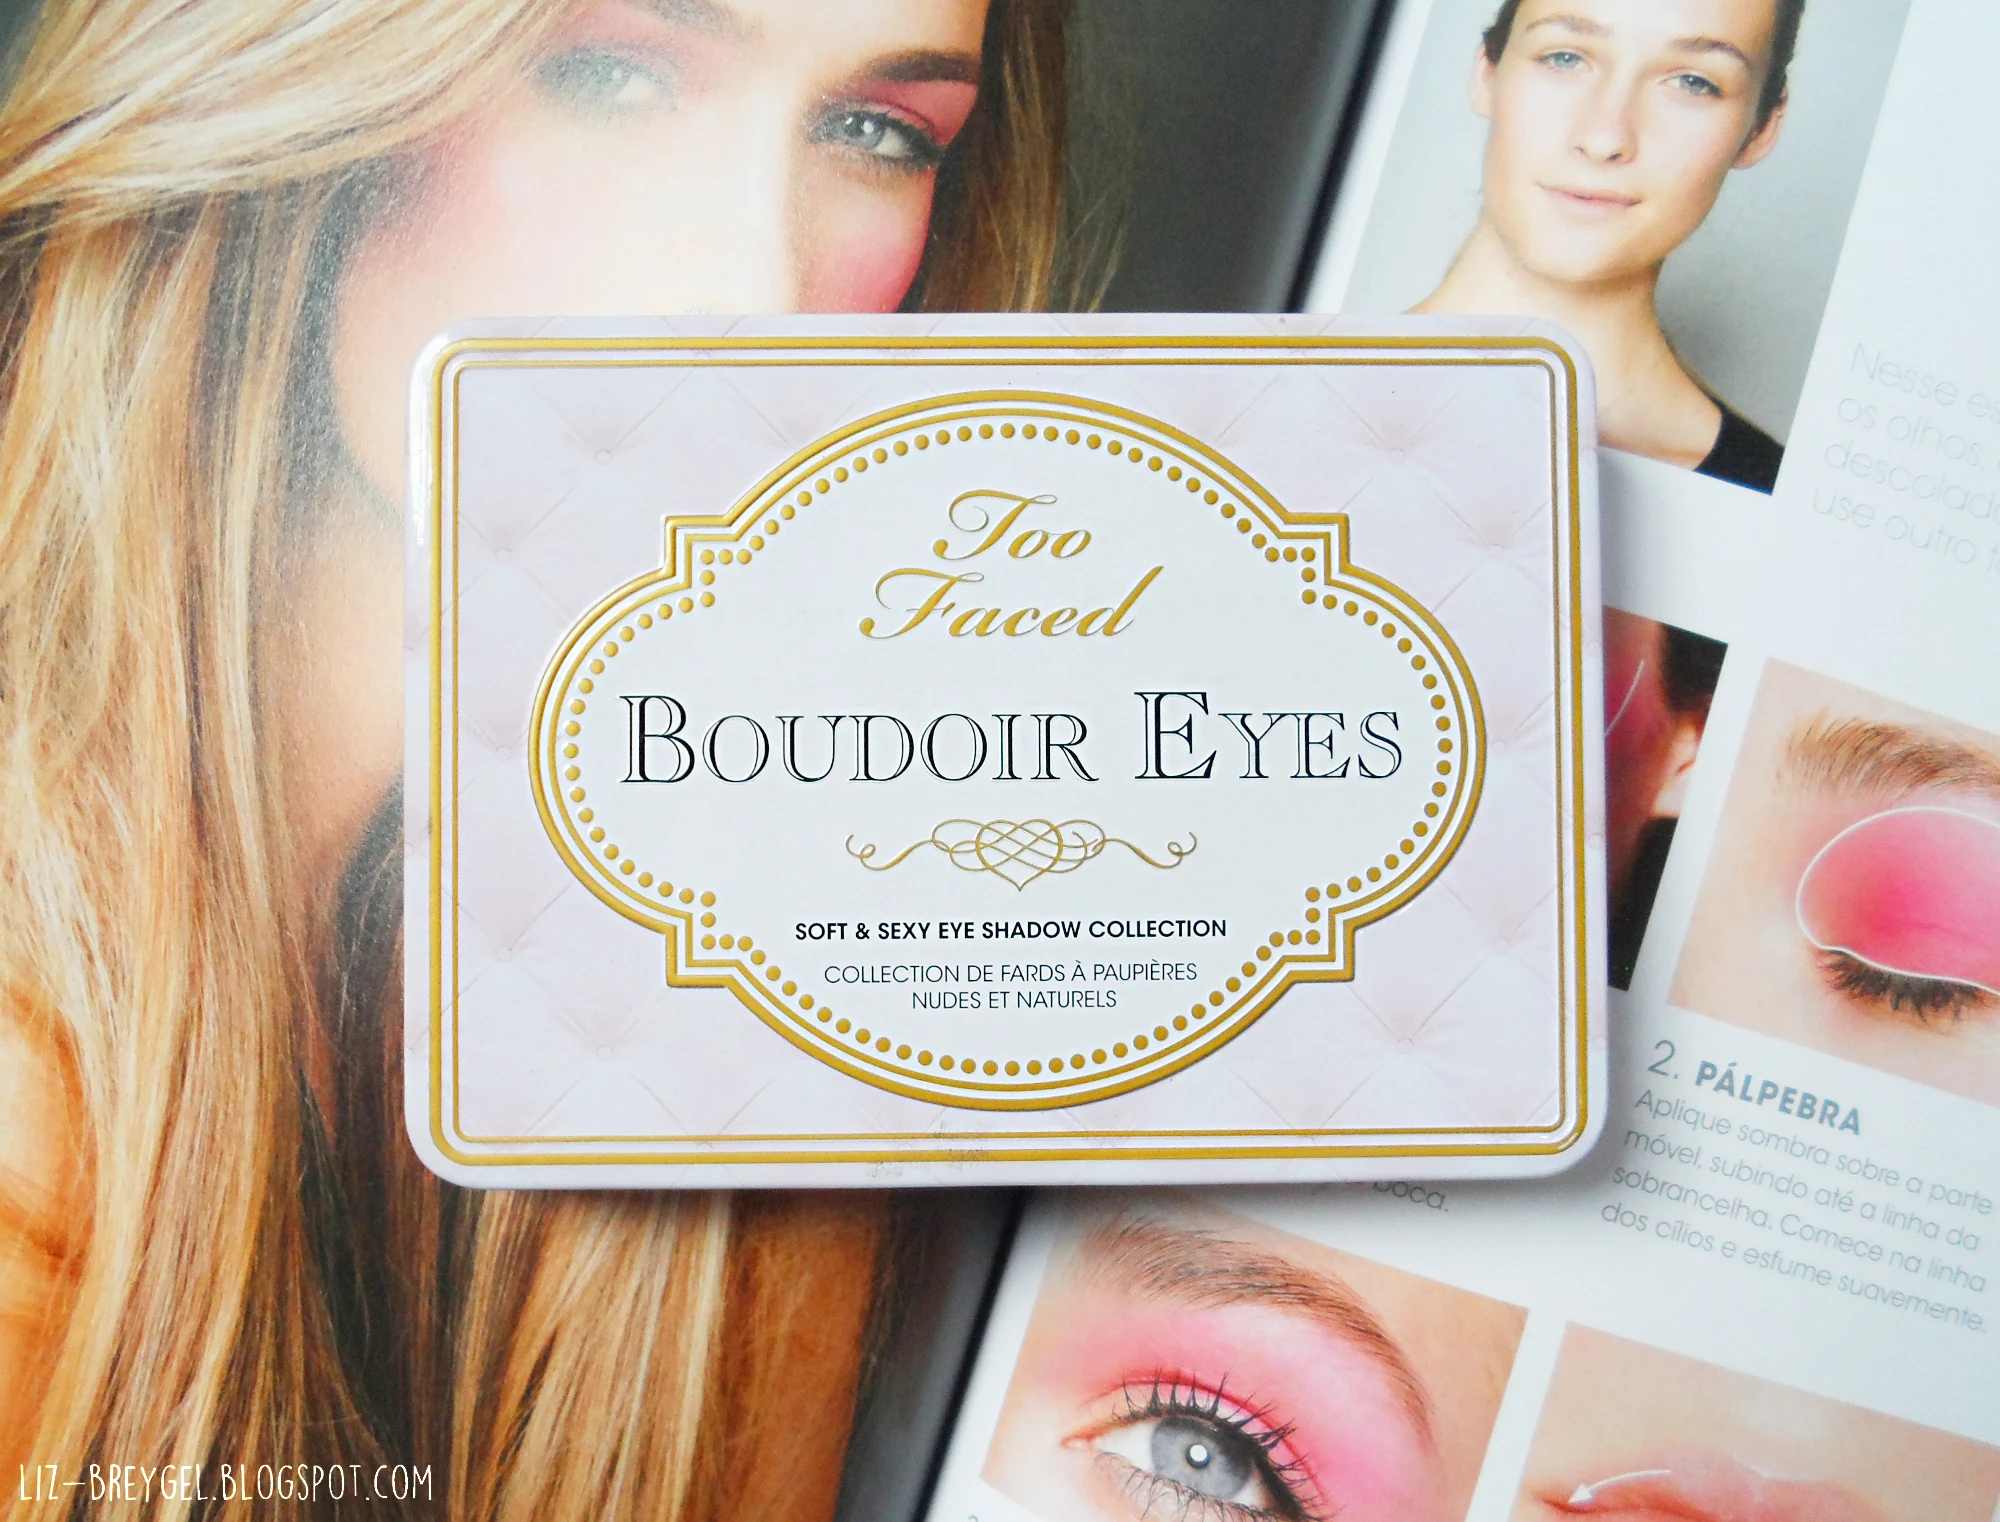 a versatile, day-to-night eyeshadow palette boudoir eyes by too faced cosmetic brand, see the full makeup review with pictures and swatches by blogger Liz Breygel.